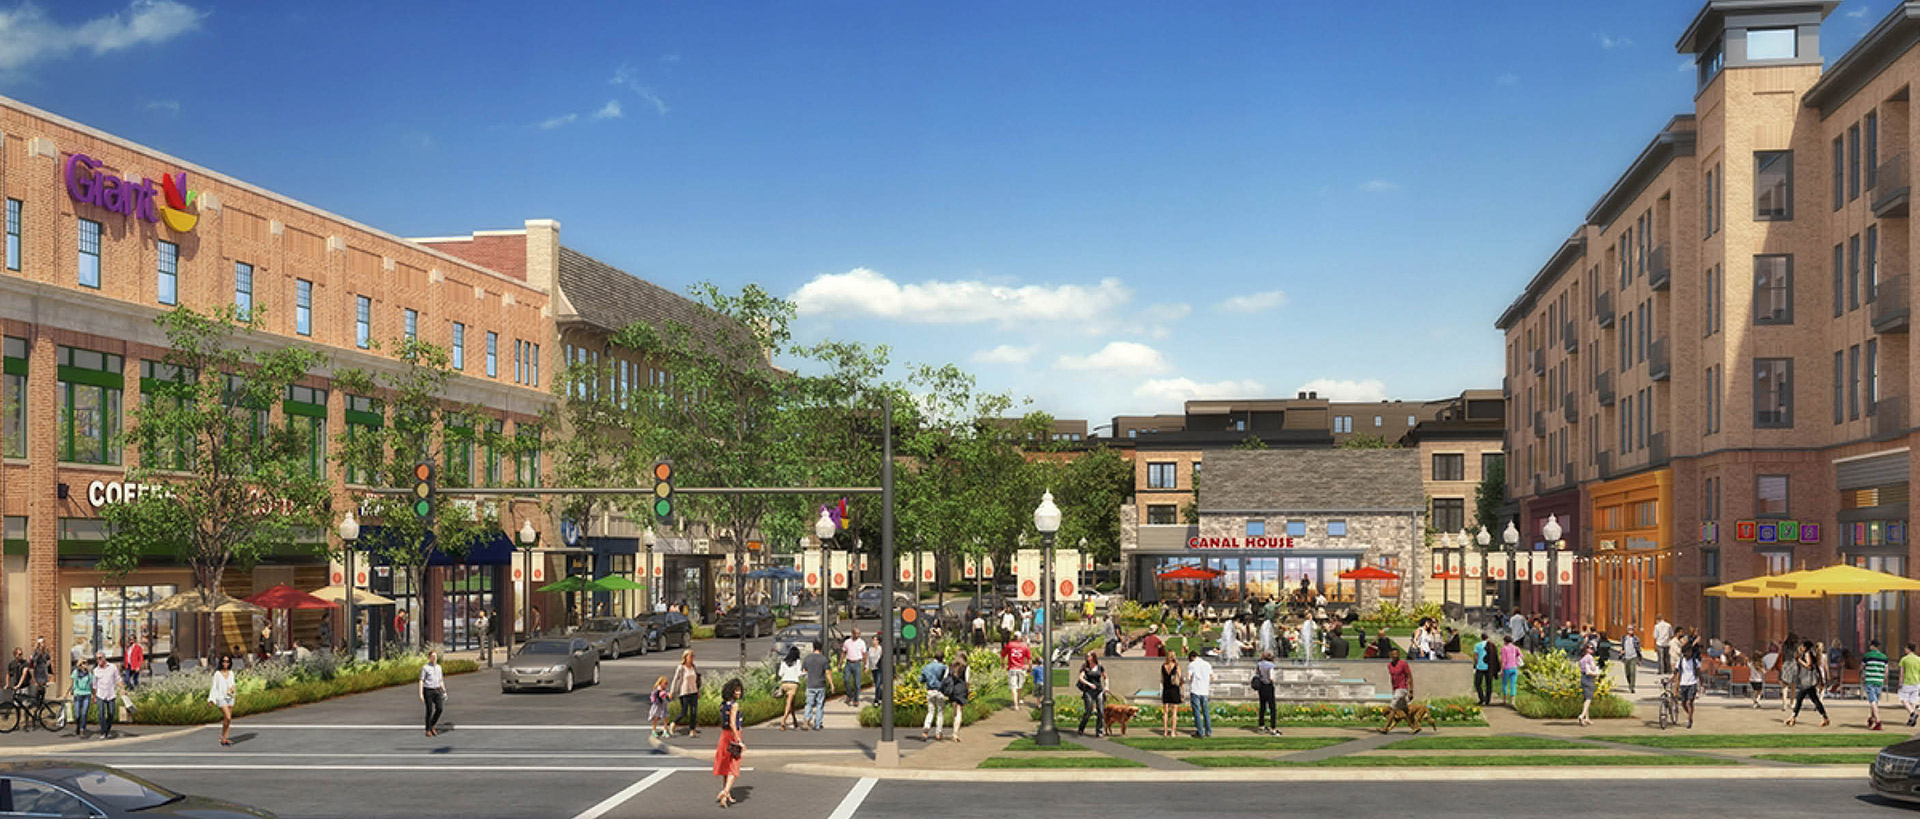 Artist's rendering of Westbard Square in Bethesda, Maryland.